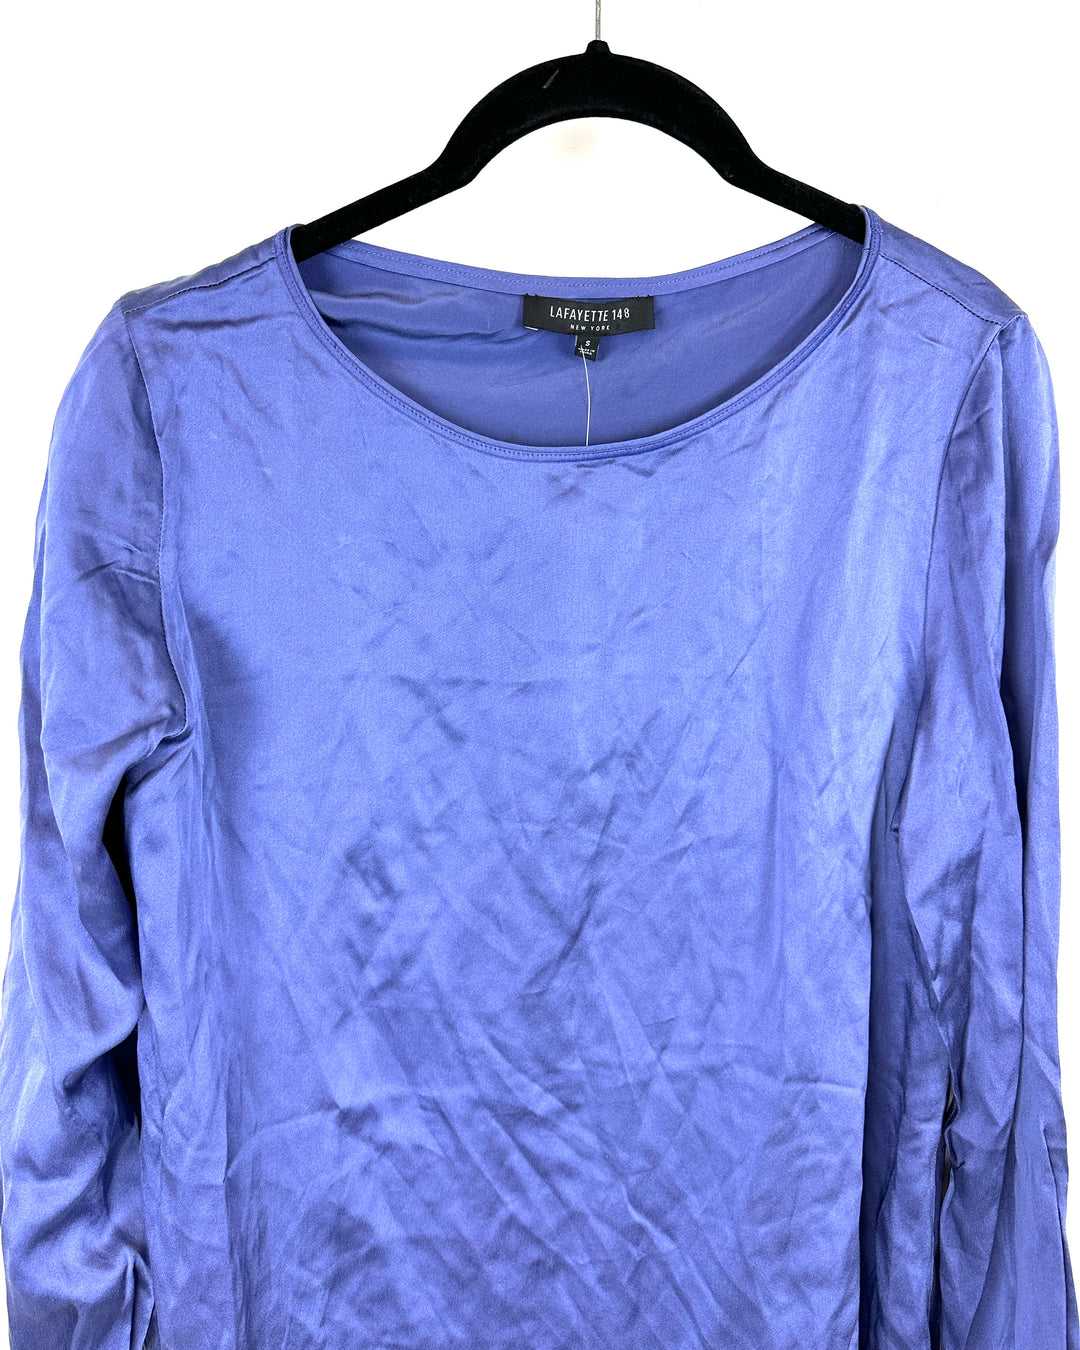 Blue Long Sleeve Top - Small